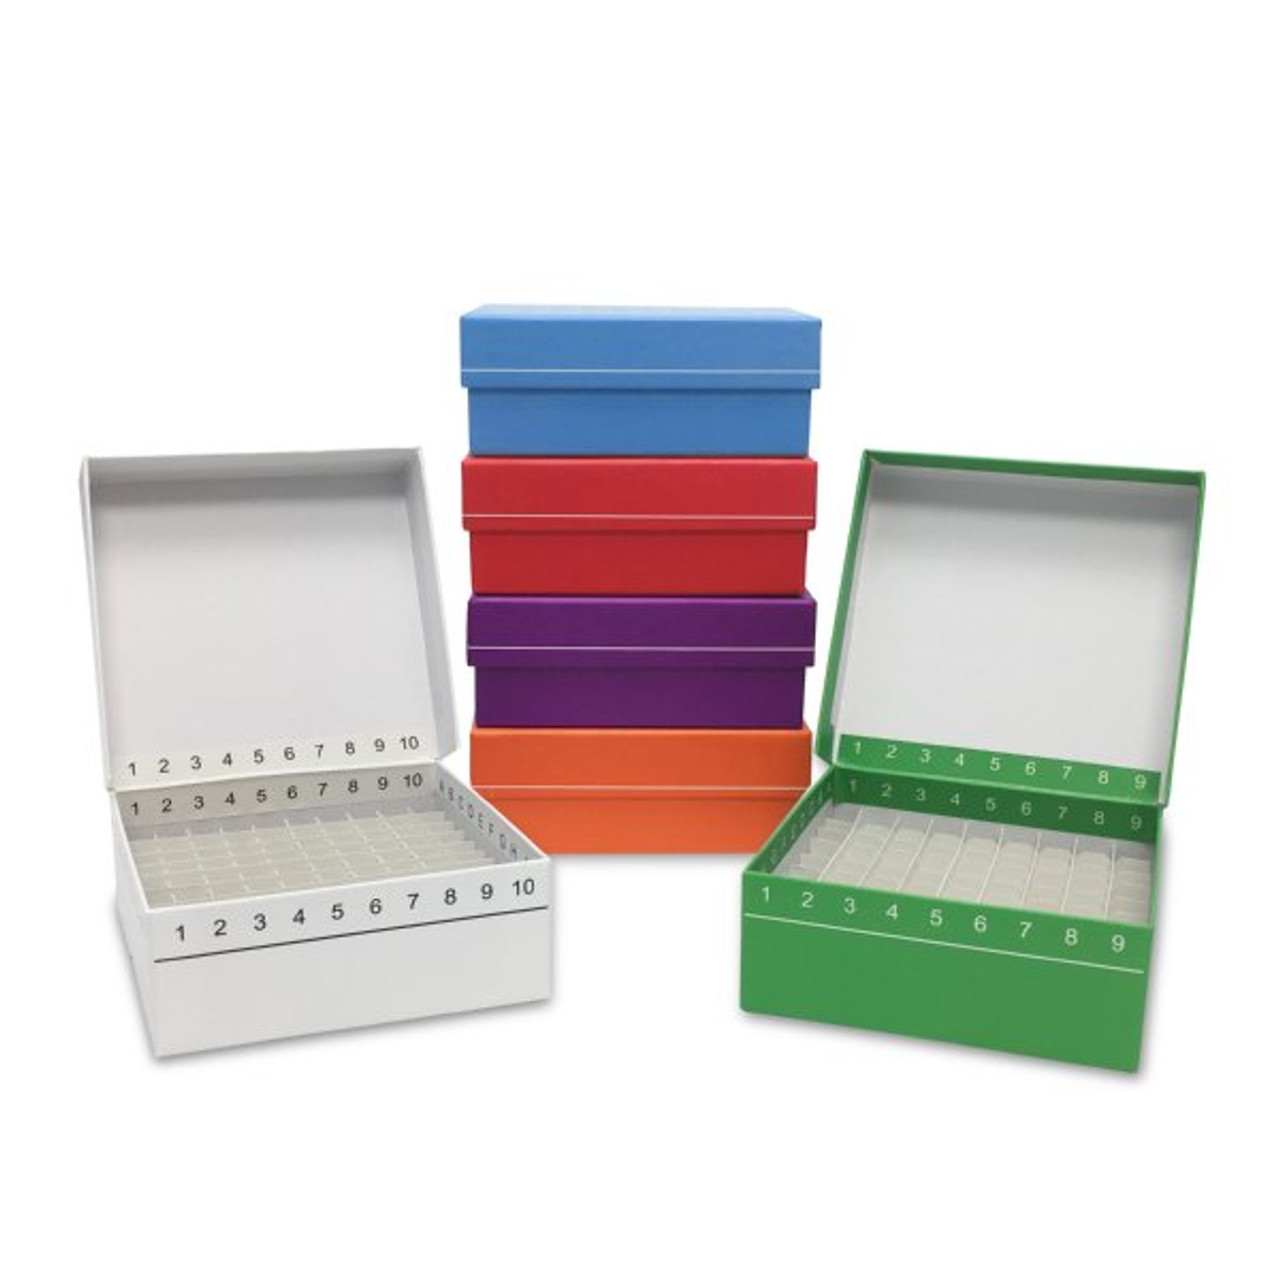 https://cdn11.bigcommerce.com/s-w9bdixgj/images/stencil/1280x1280/products/2653/5775/Stellar_Scientific_Bulls-Eye_Cardboard_Freezer_Boxes_Come_in_these_Colors_-_Lab_Supplies__40590.1557304920.jpg?c=2